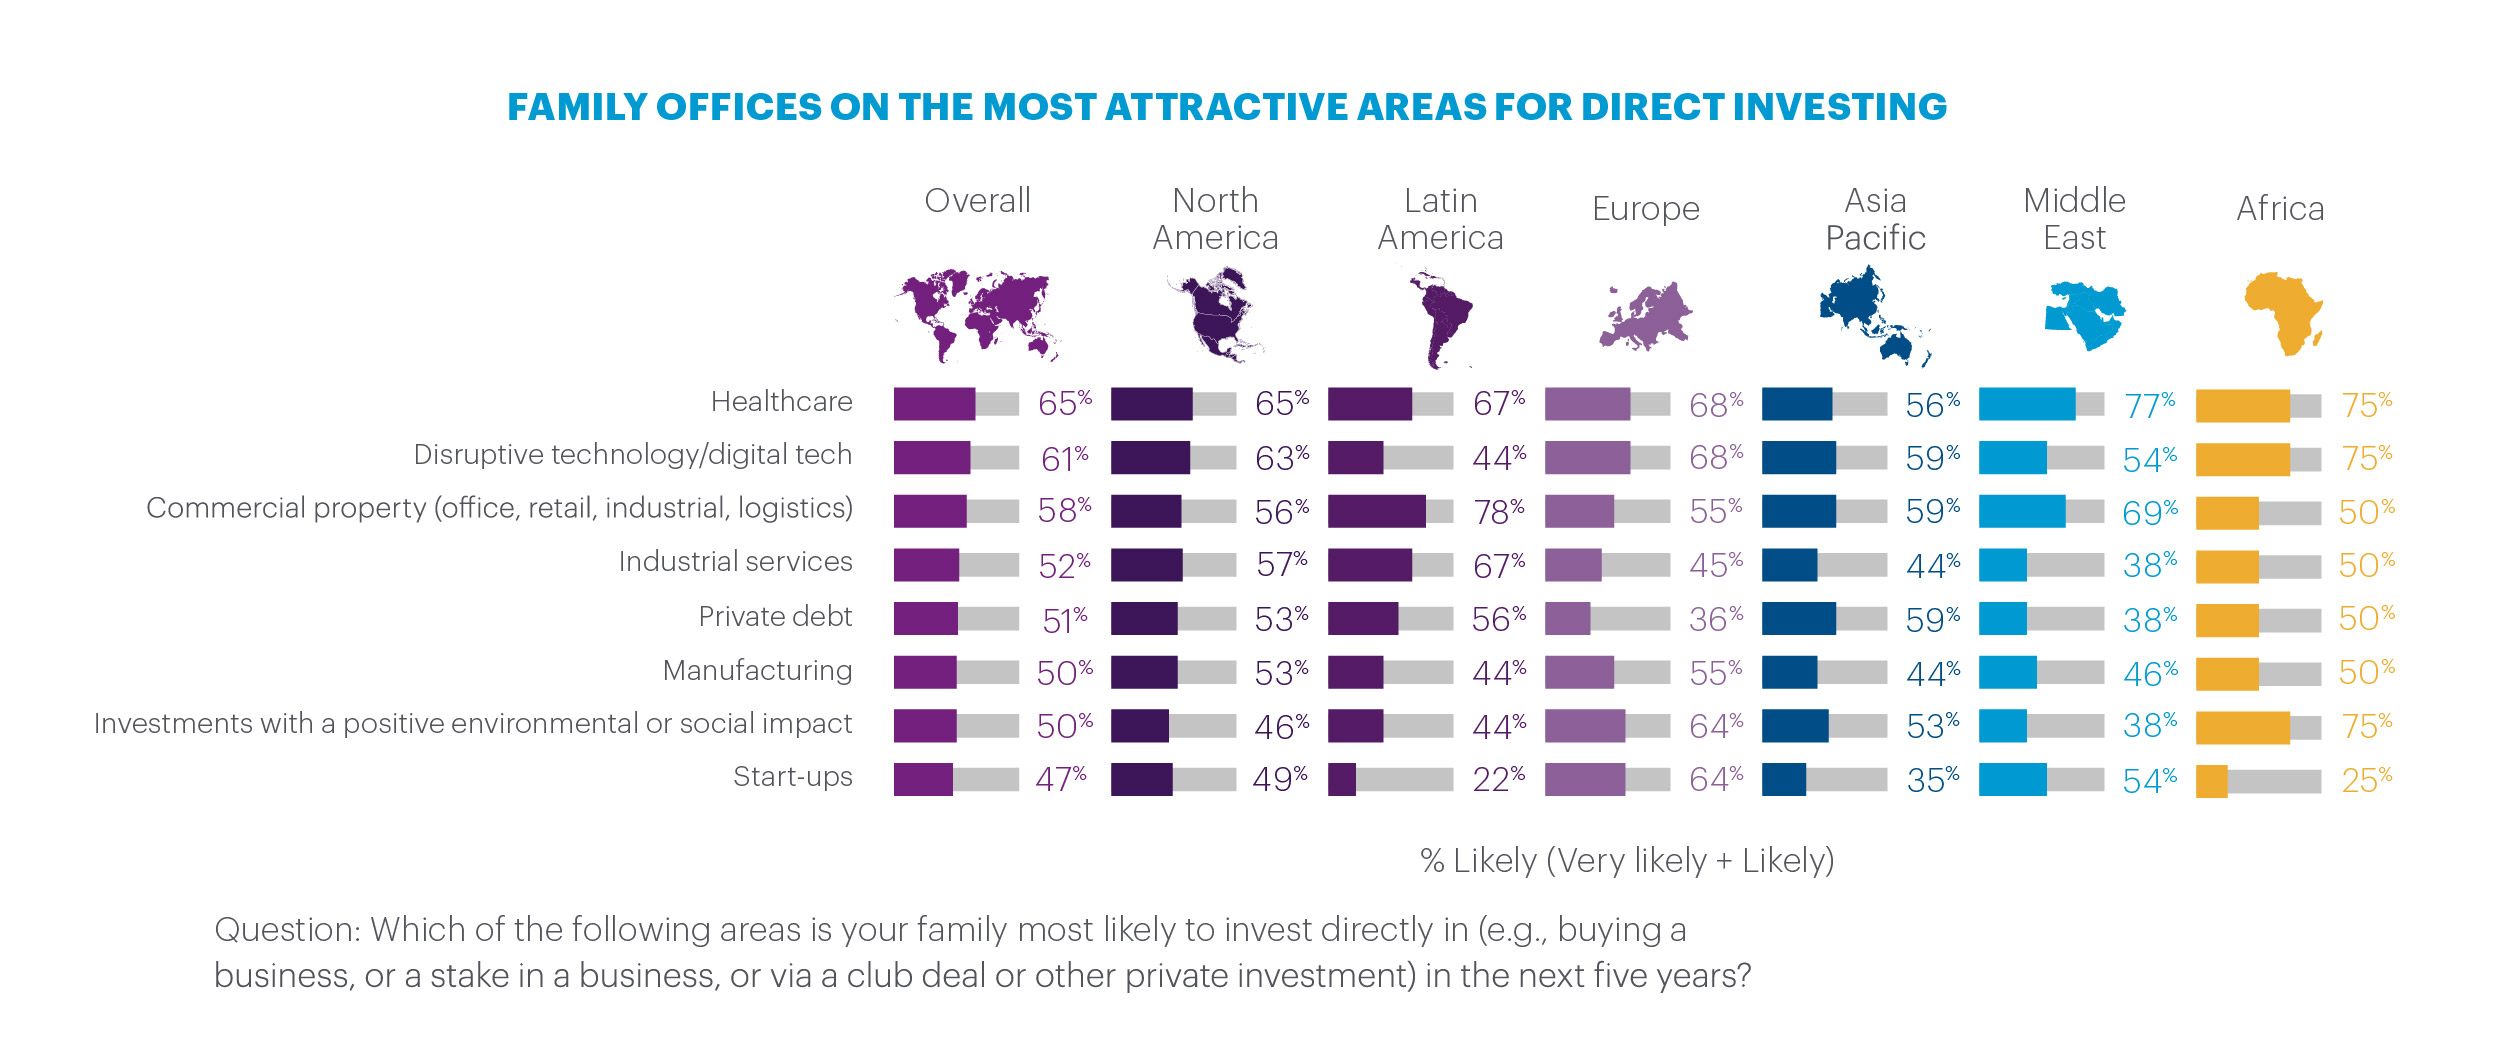 List of most attractive areas for direct investing